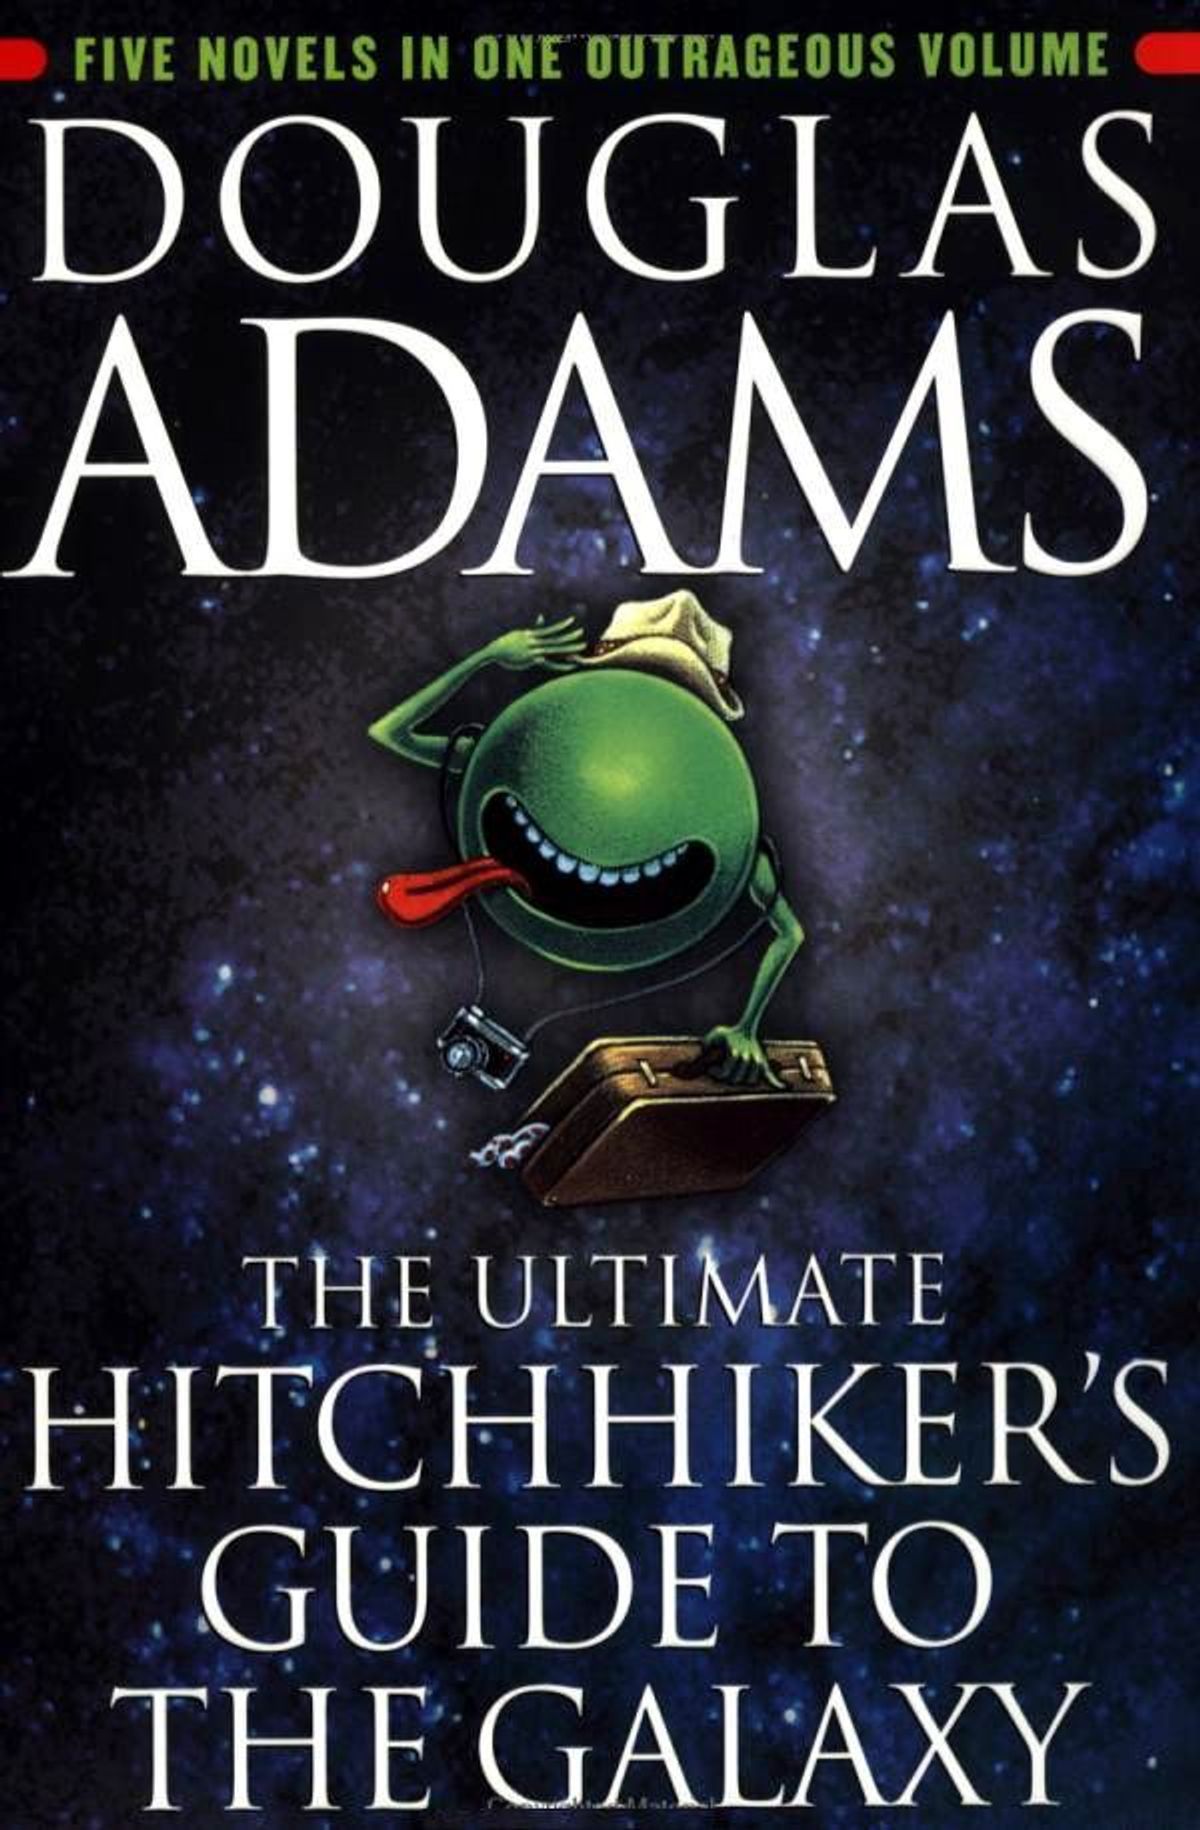 A Book Review Of Hitchhiker's Guide To The Galaxy By Douglas Adams